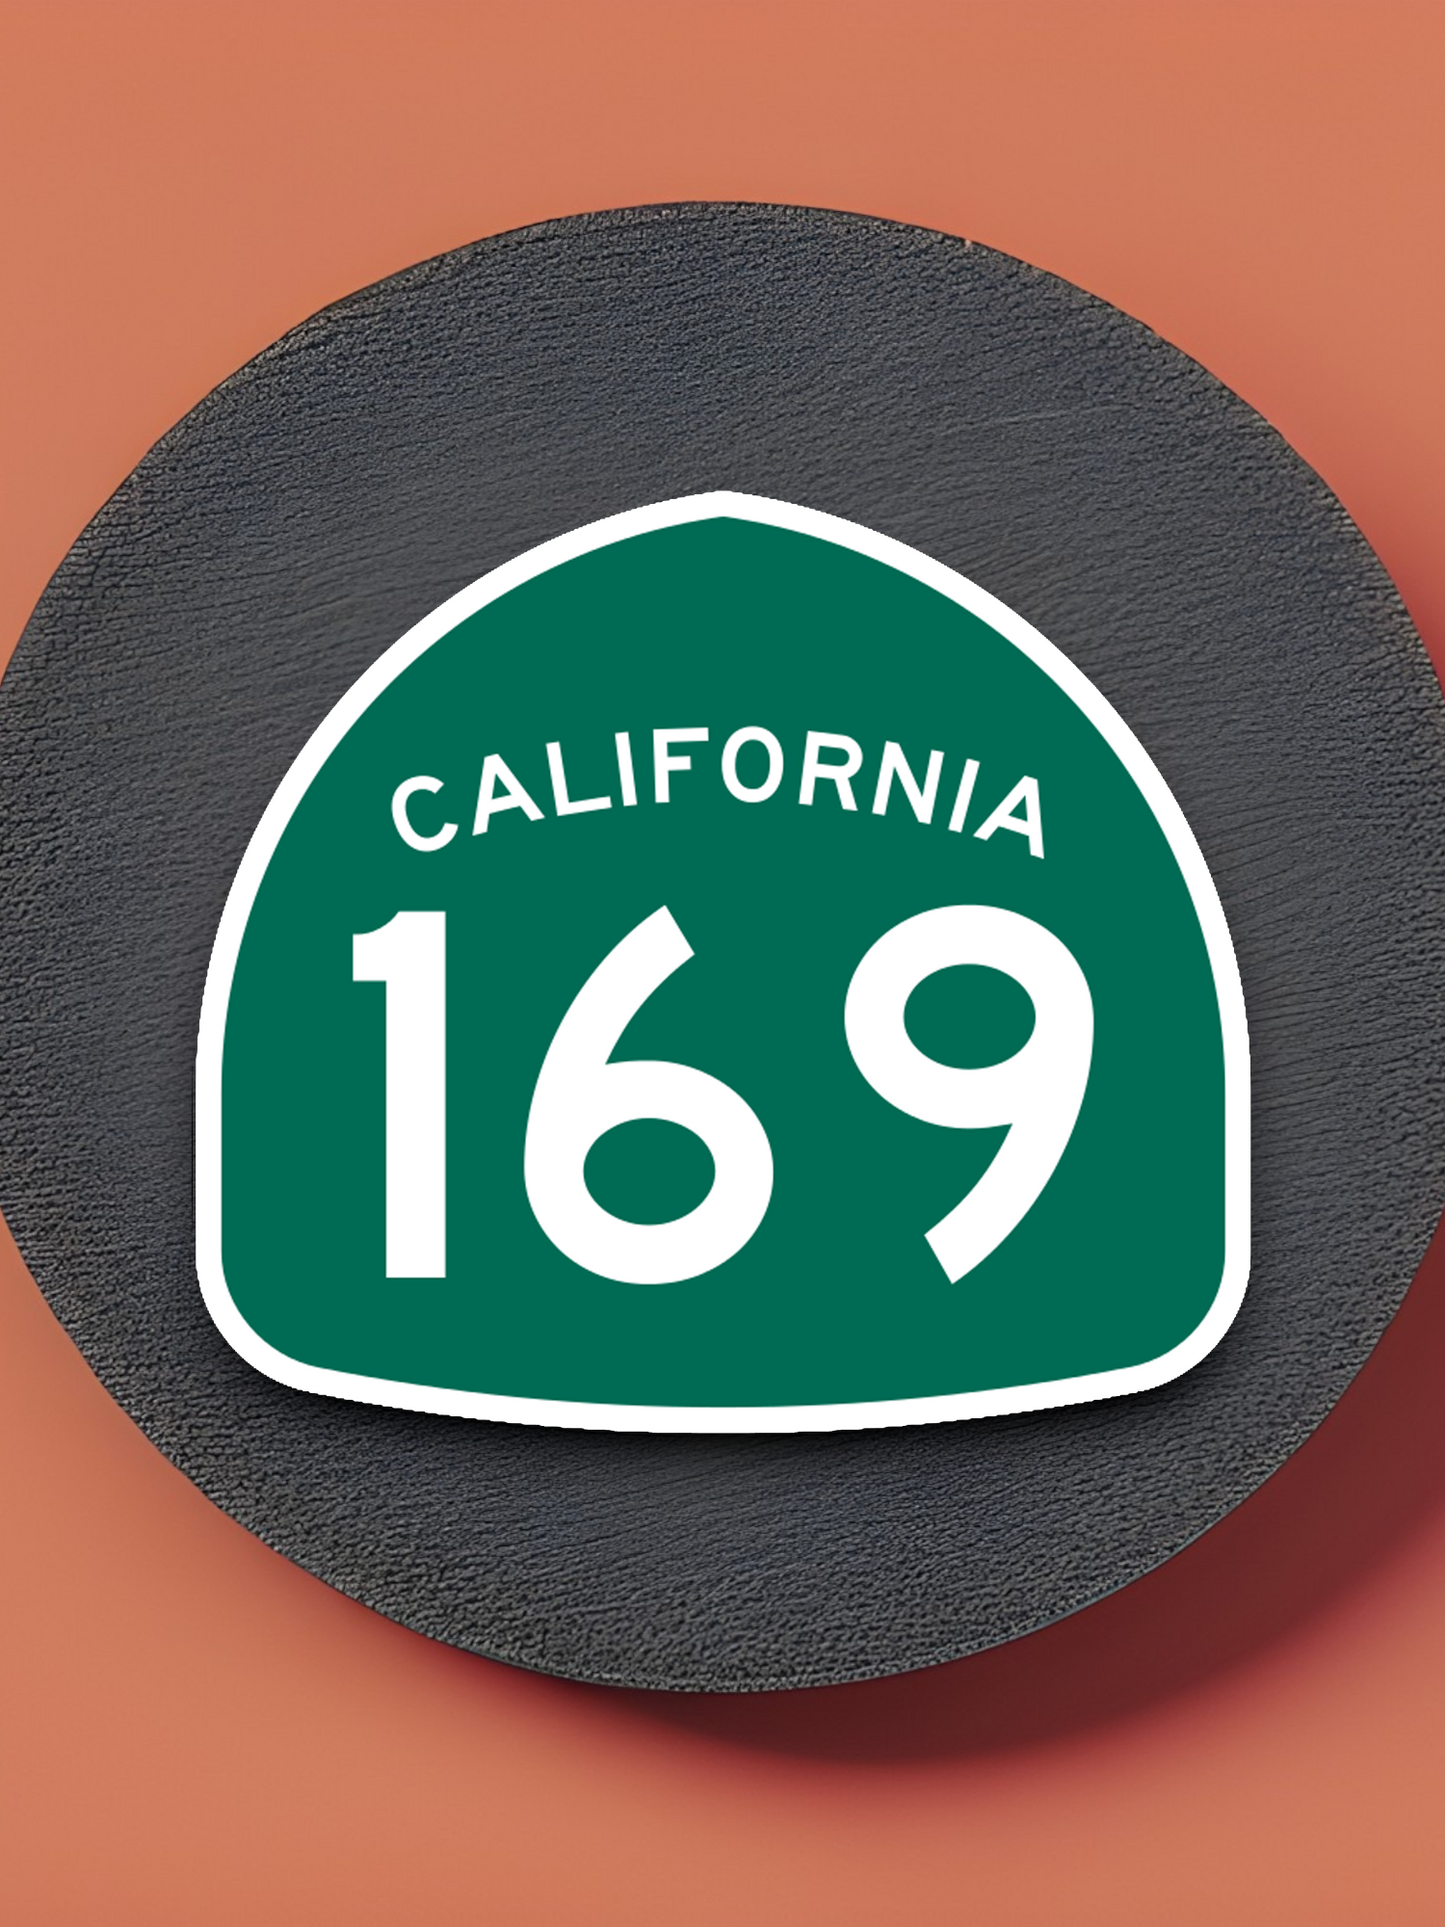 California State Route 169 Road Sign Sticker